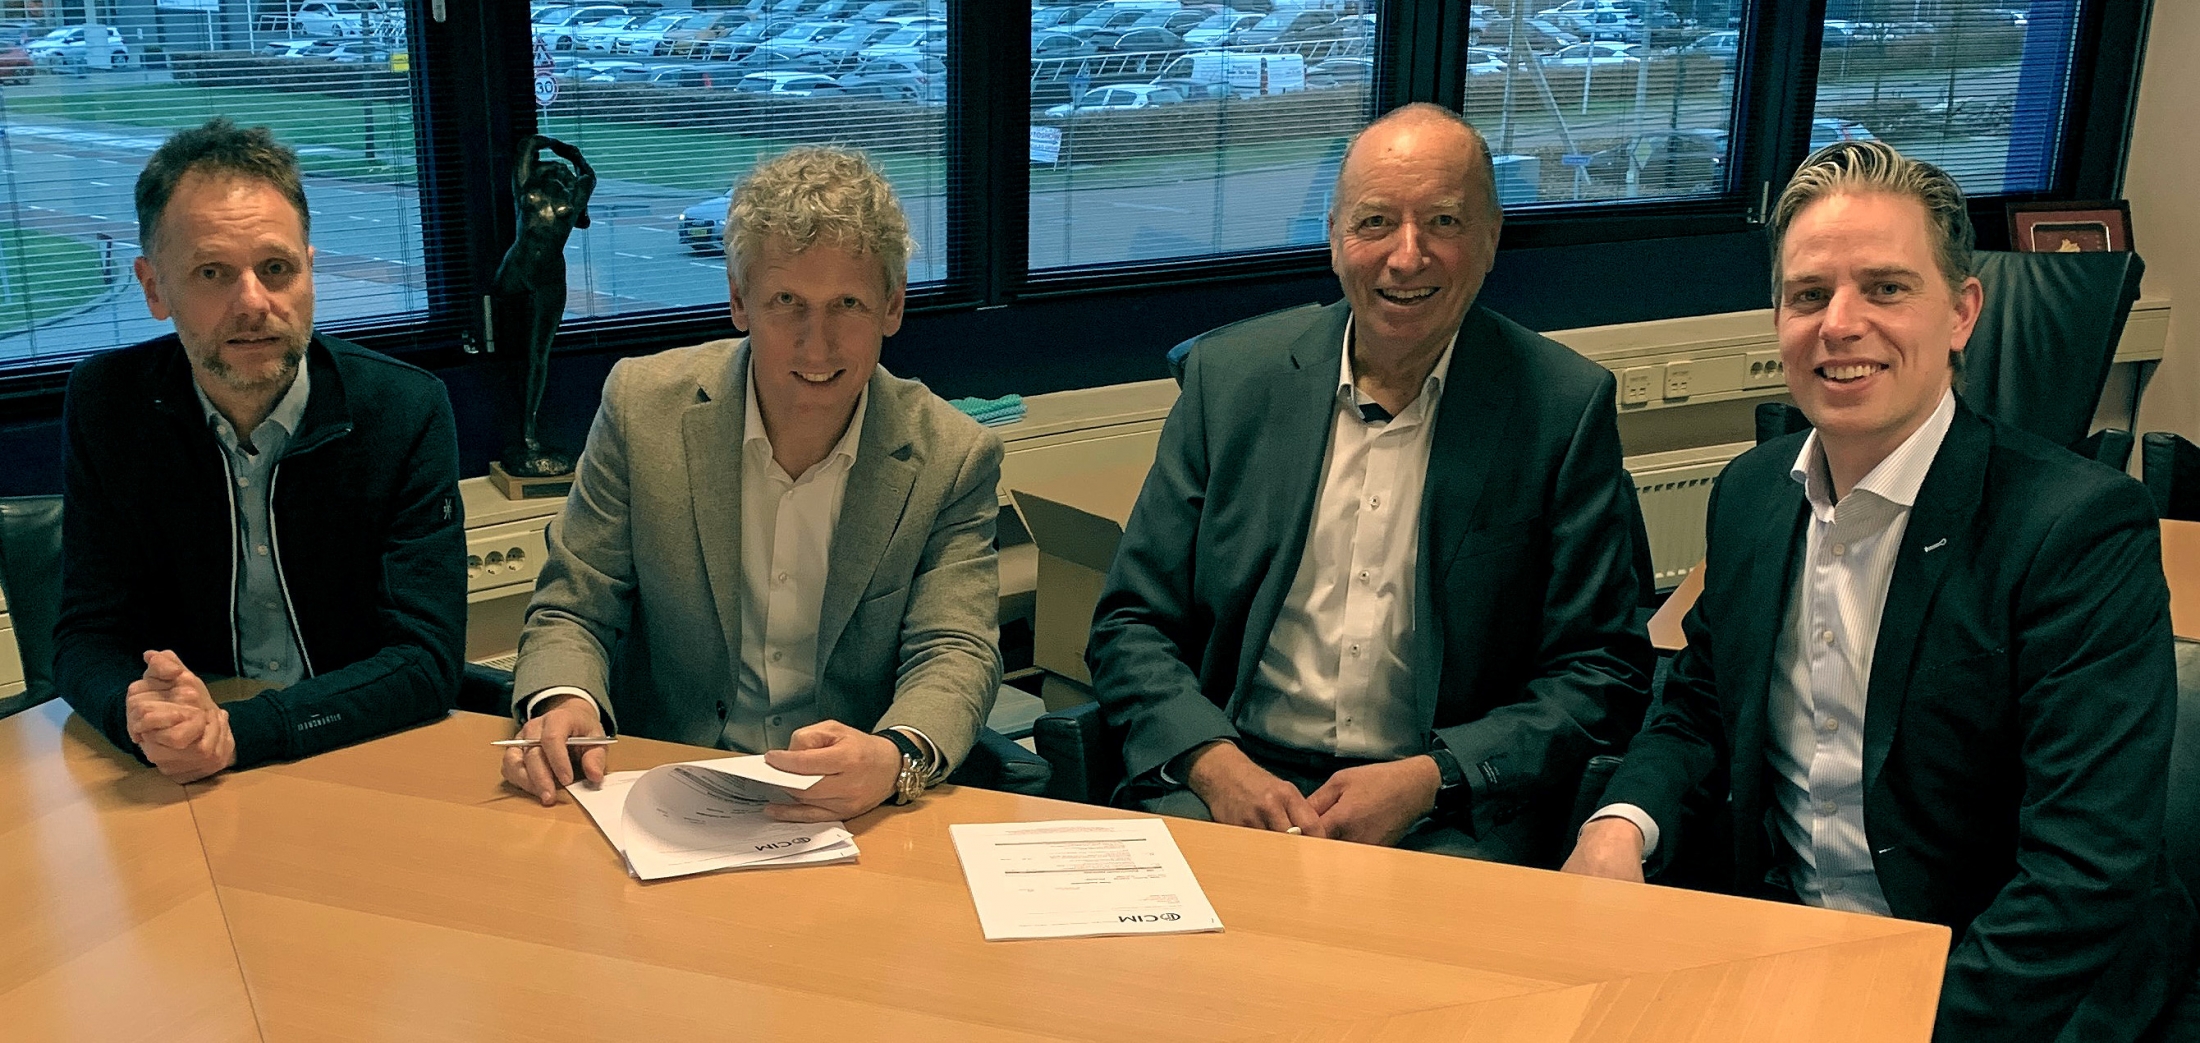 Jeroen van den Berg, Hans-Paul Visscher, Fritz Mayr (managing director of CIM) and Maarten Janssen on signing the contract (from left to right). Note: the photo was taken before the current coronavirus restrictions were implemented.